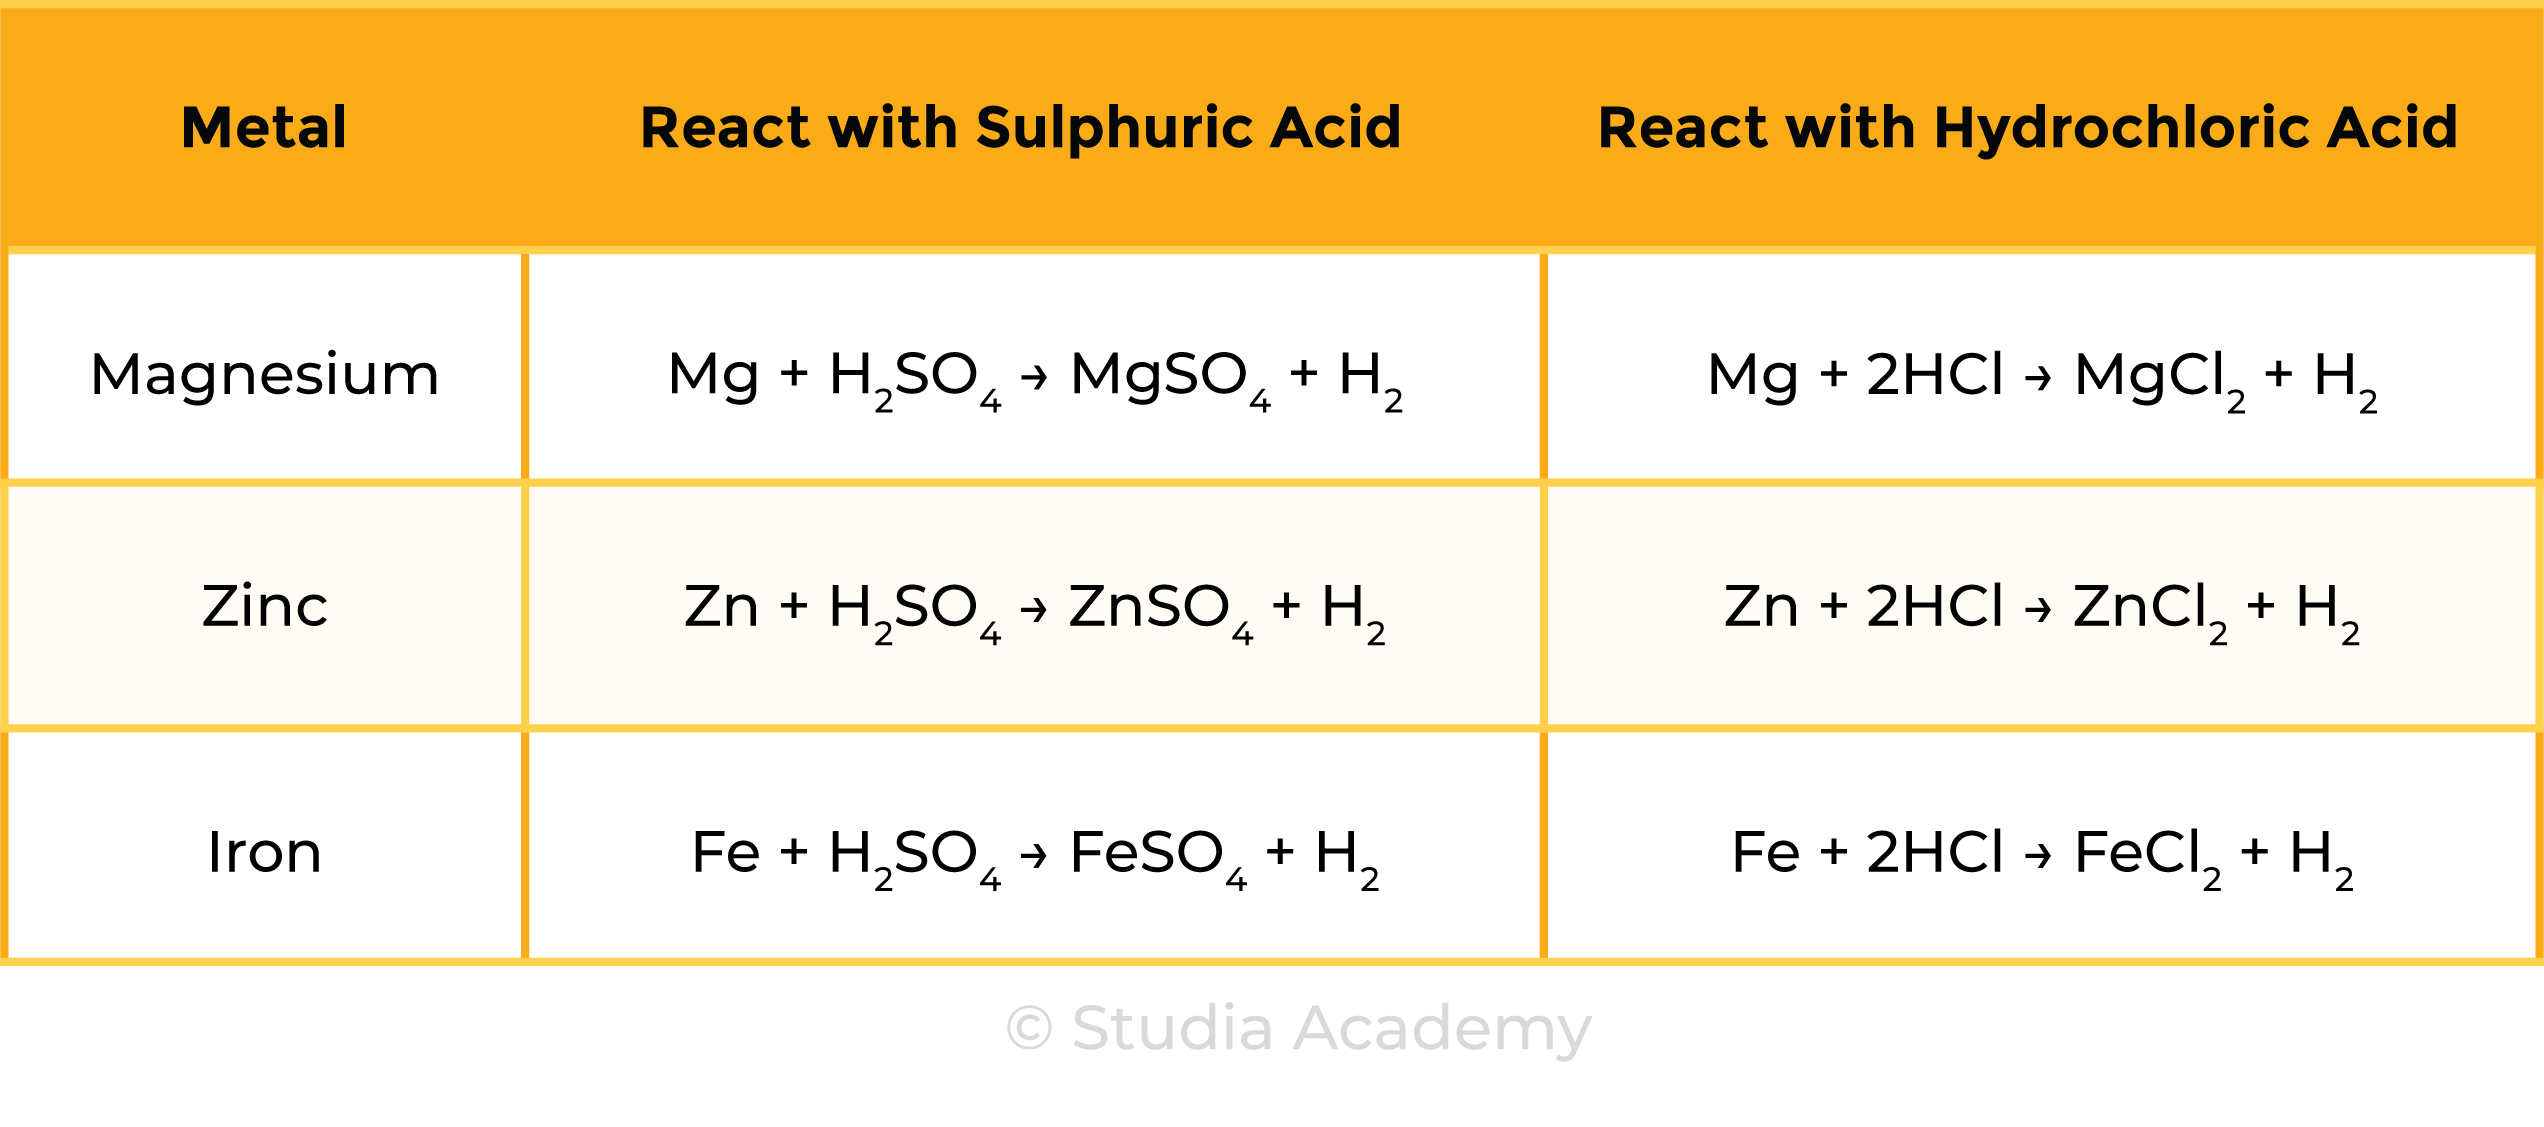 edexcel_igcse_chemistry_topic 13 tables_reactivity series_002_example metals reaction with sulphuric and hydrochloric acid